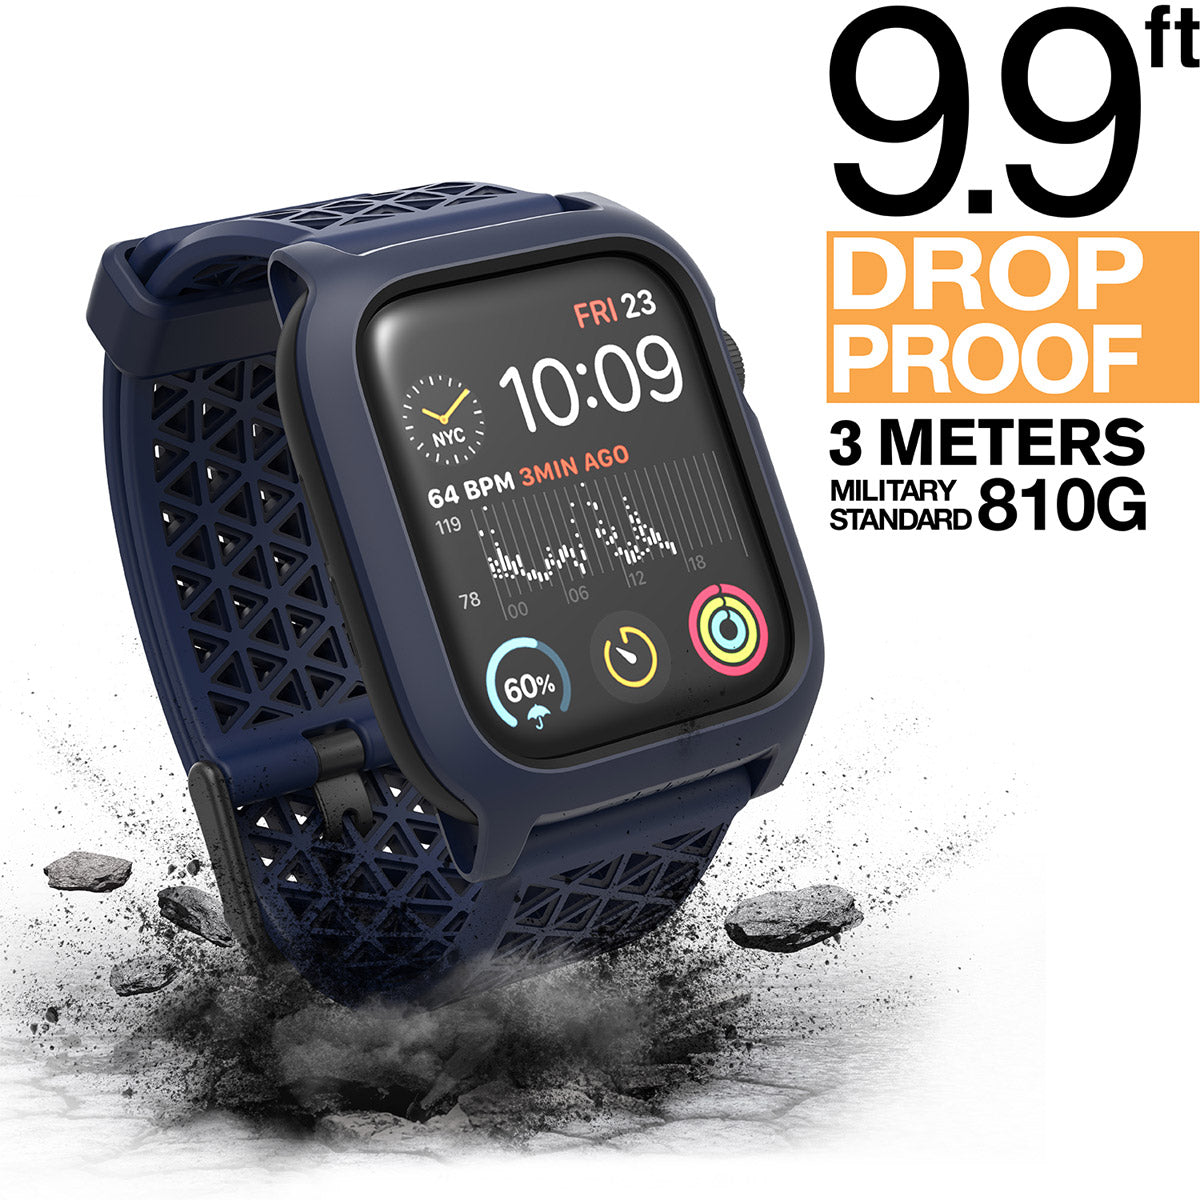 catalyst apple watch series 6 5 4 se gen 21 44mm 40mm impact protection case sport band midnight blue showing an apple watch with a catalyst case and a cracked floor text reads 9.9ft drop proof 3 meters military standard 810g